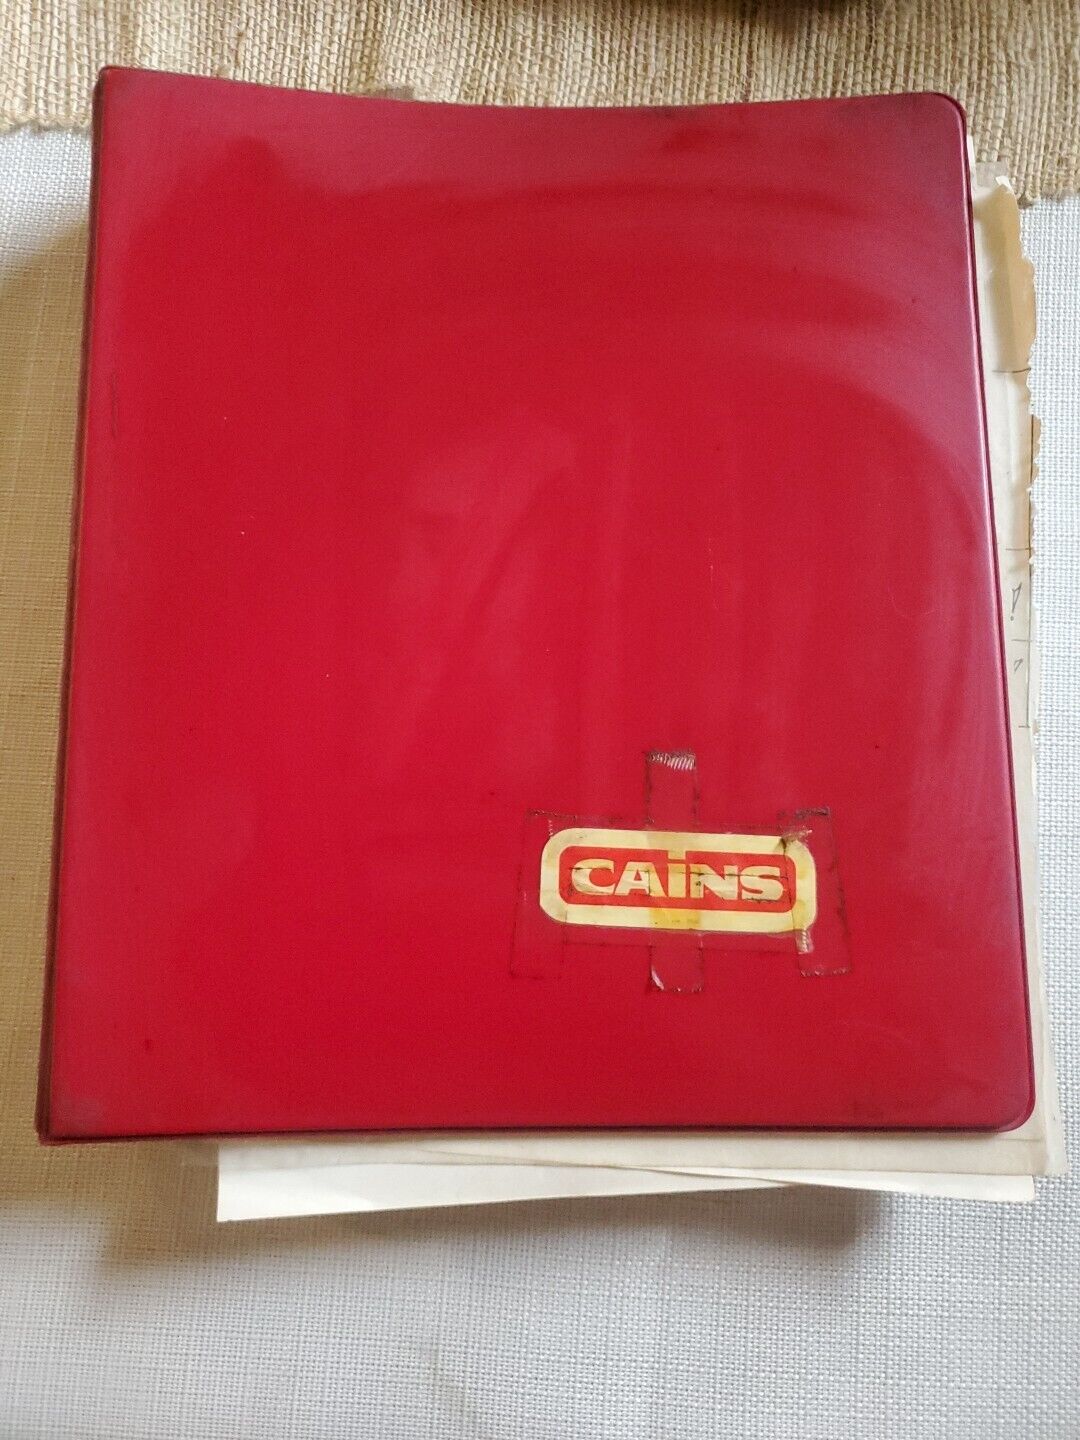 1960s Cains Food Product Sales Binder price lists and display photos 40+ pages